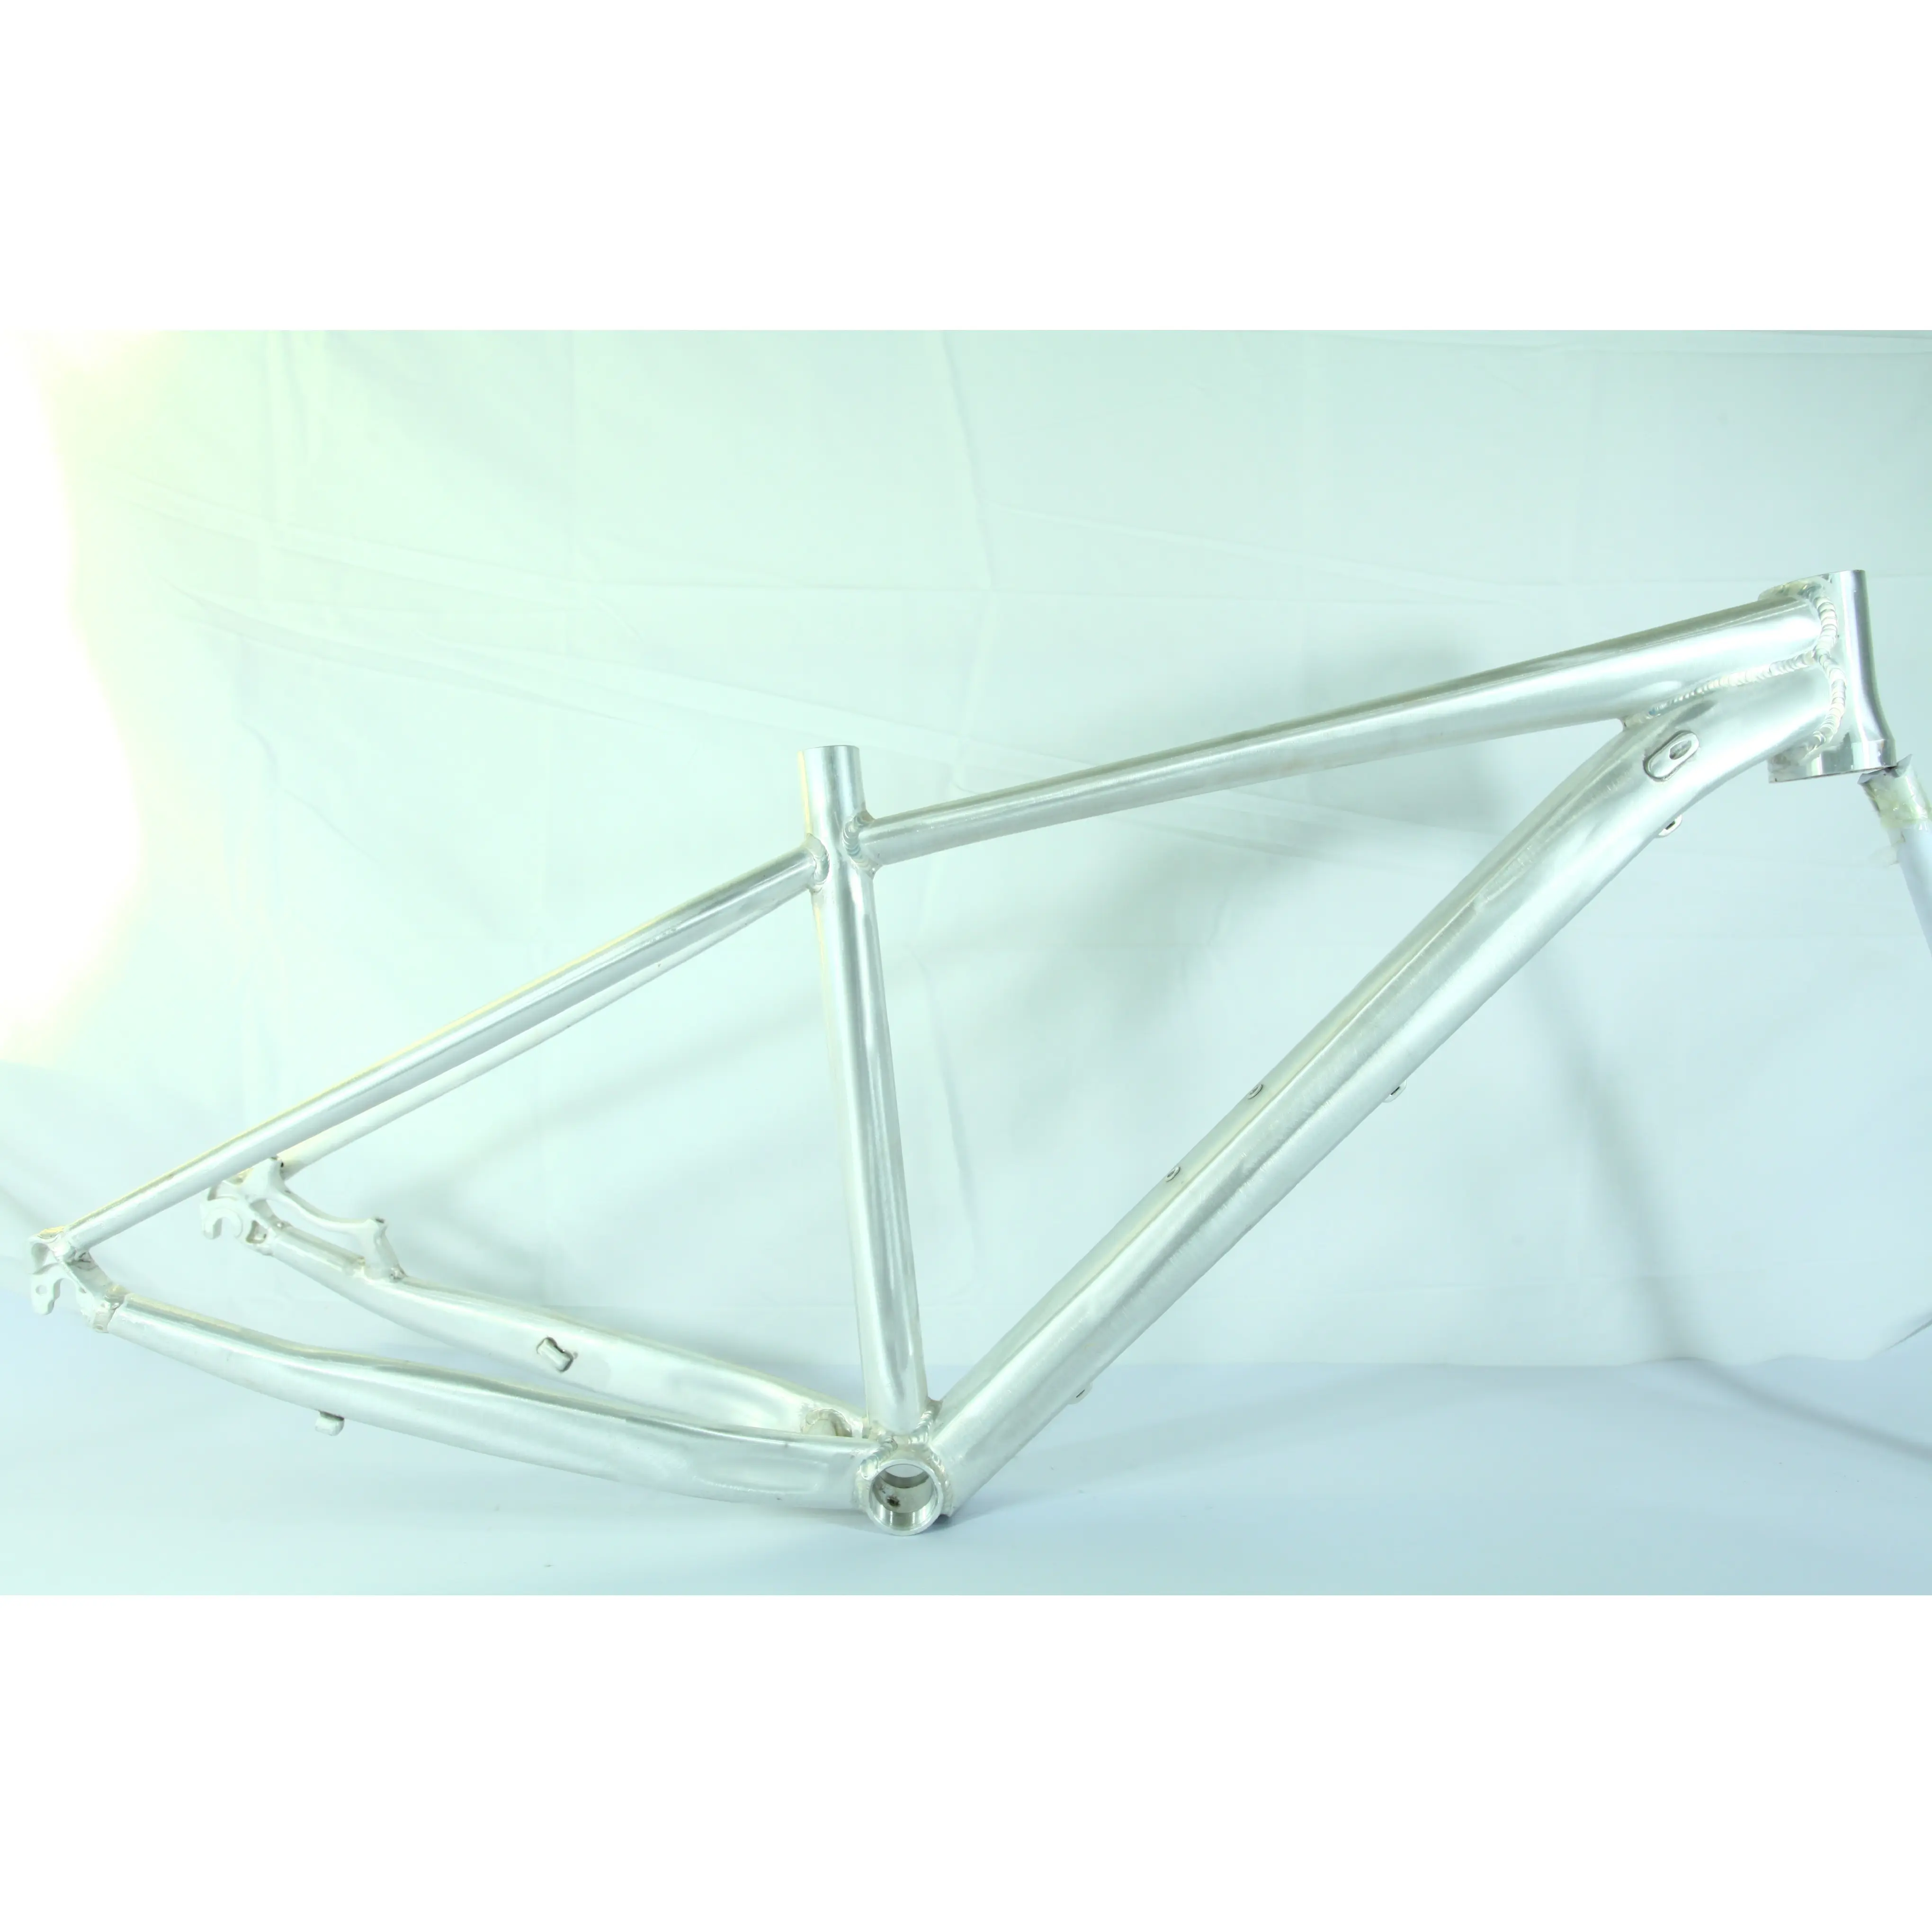 2022 Premium High-end Cheap Mountain Bike Frame Aluminum Alloy 6061 Woman's Man's Bicycle Frame Made In China 075 Cycle